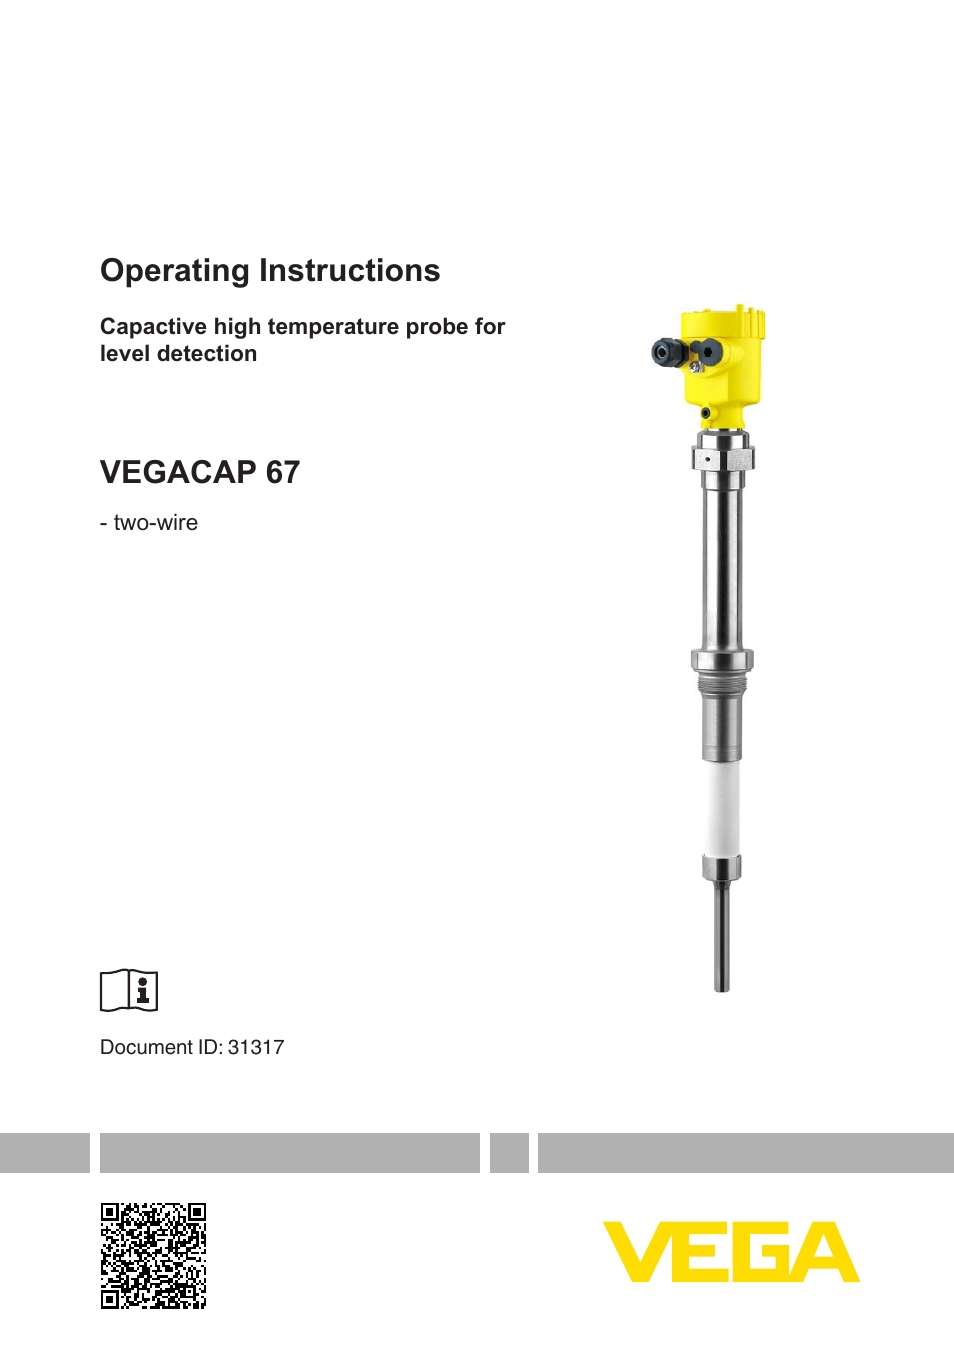 VEGACAP 67 - two-wire